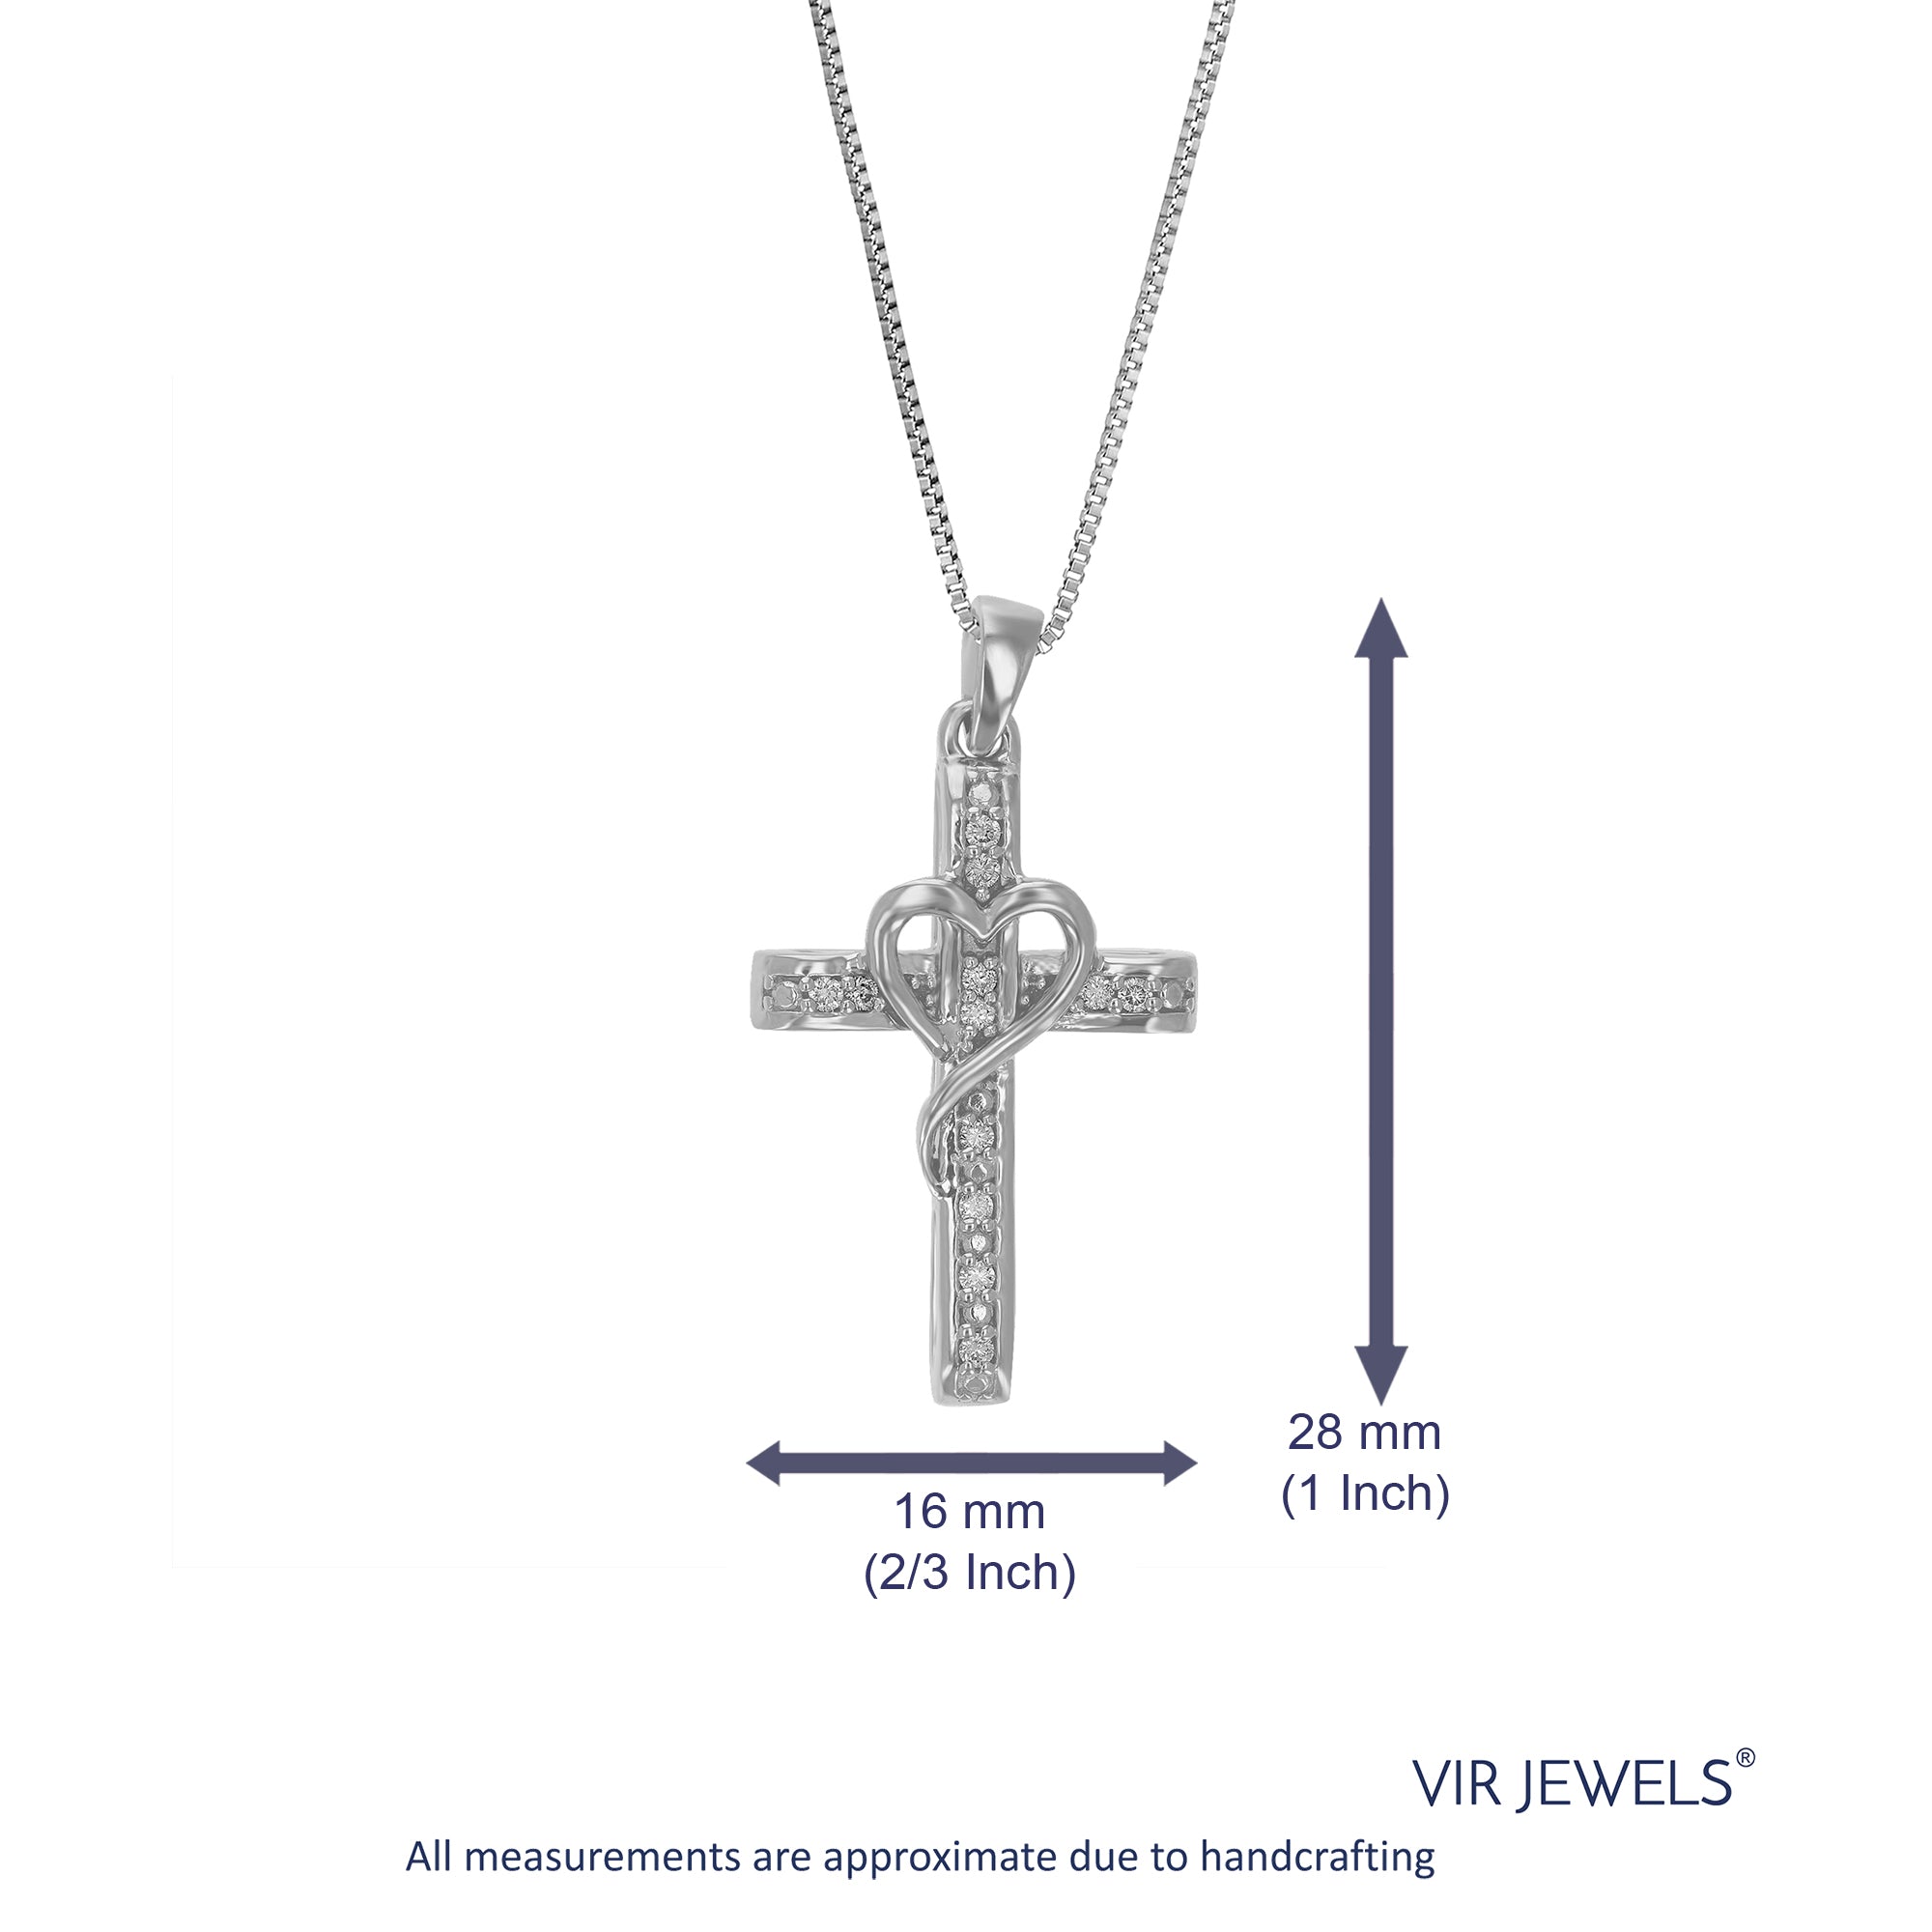 1/10 cttw Diamond Pendant Necklace for Women, Lab Grown Diamond Cross Heart Pendant Necklace in .925 Sterling Silver with Chain, Size 1 Inch